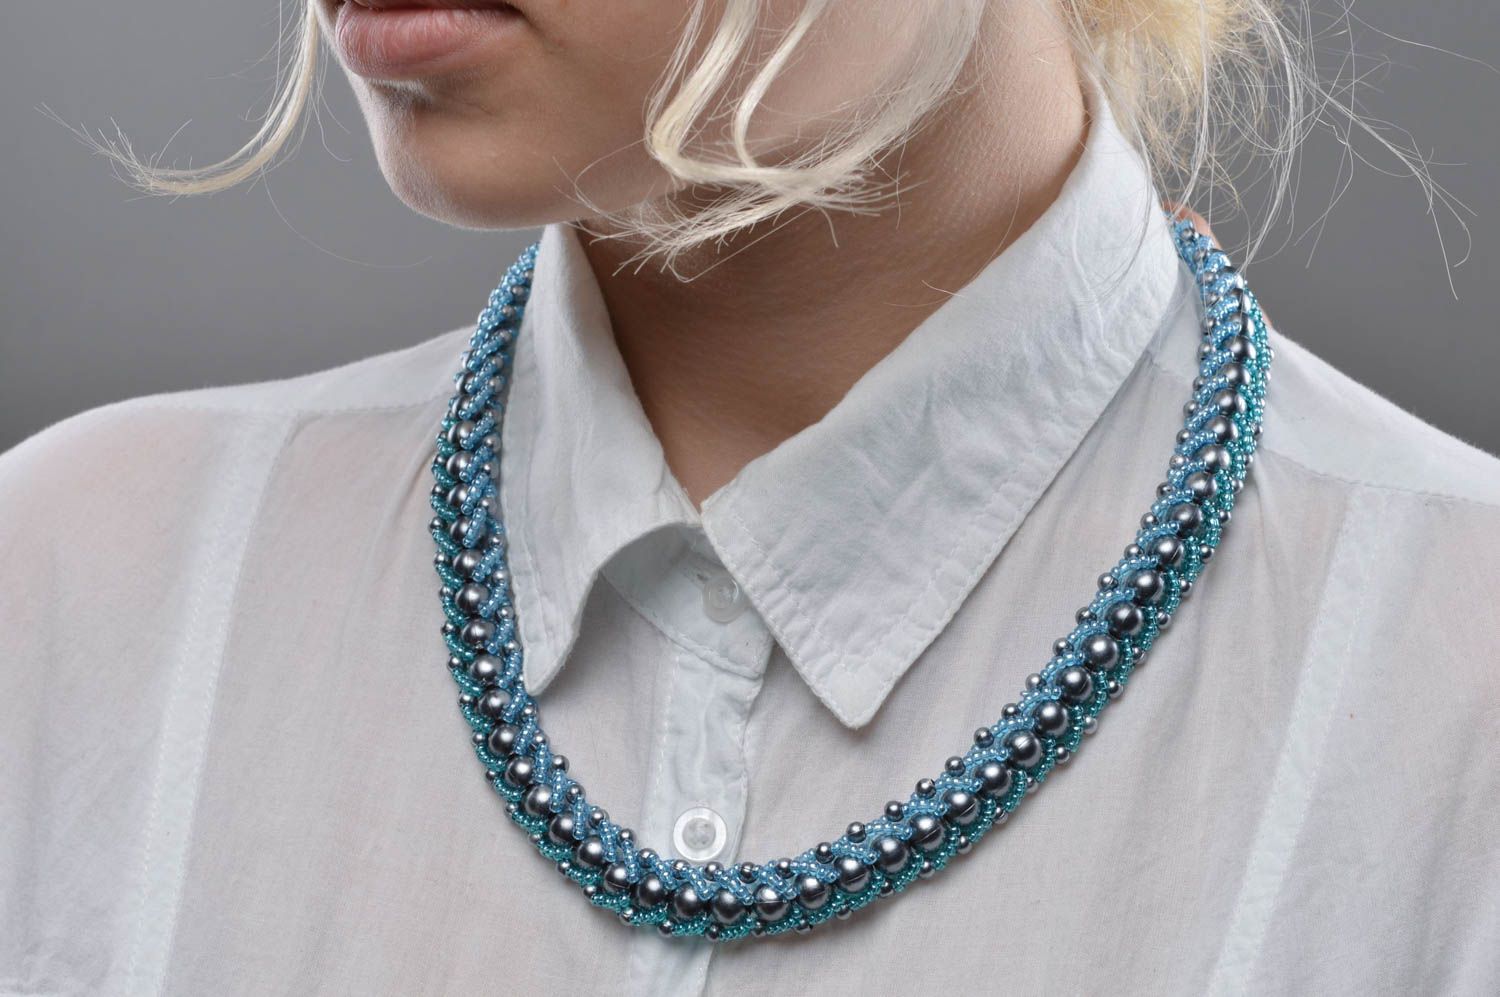 Handmade necklace made of beads blue accessory for women stylish jewelry photo 4